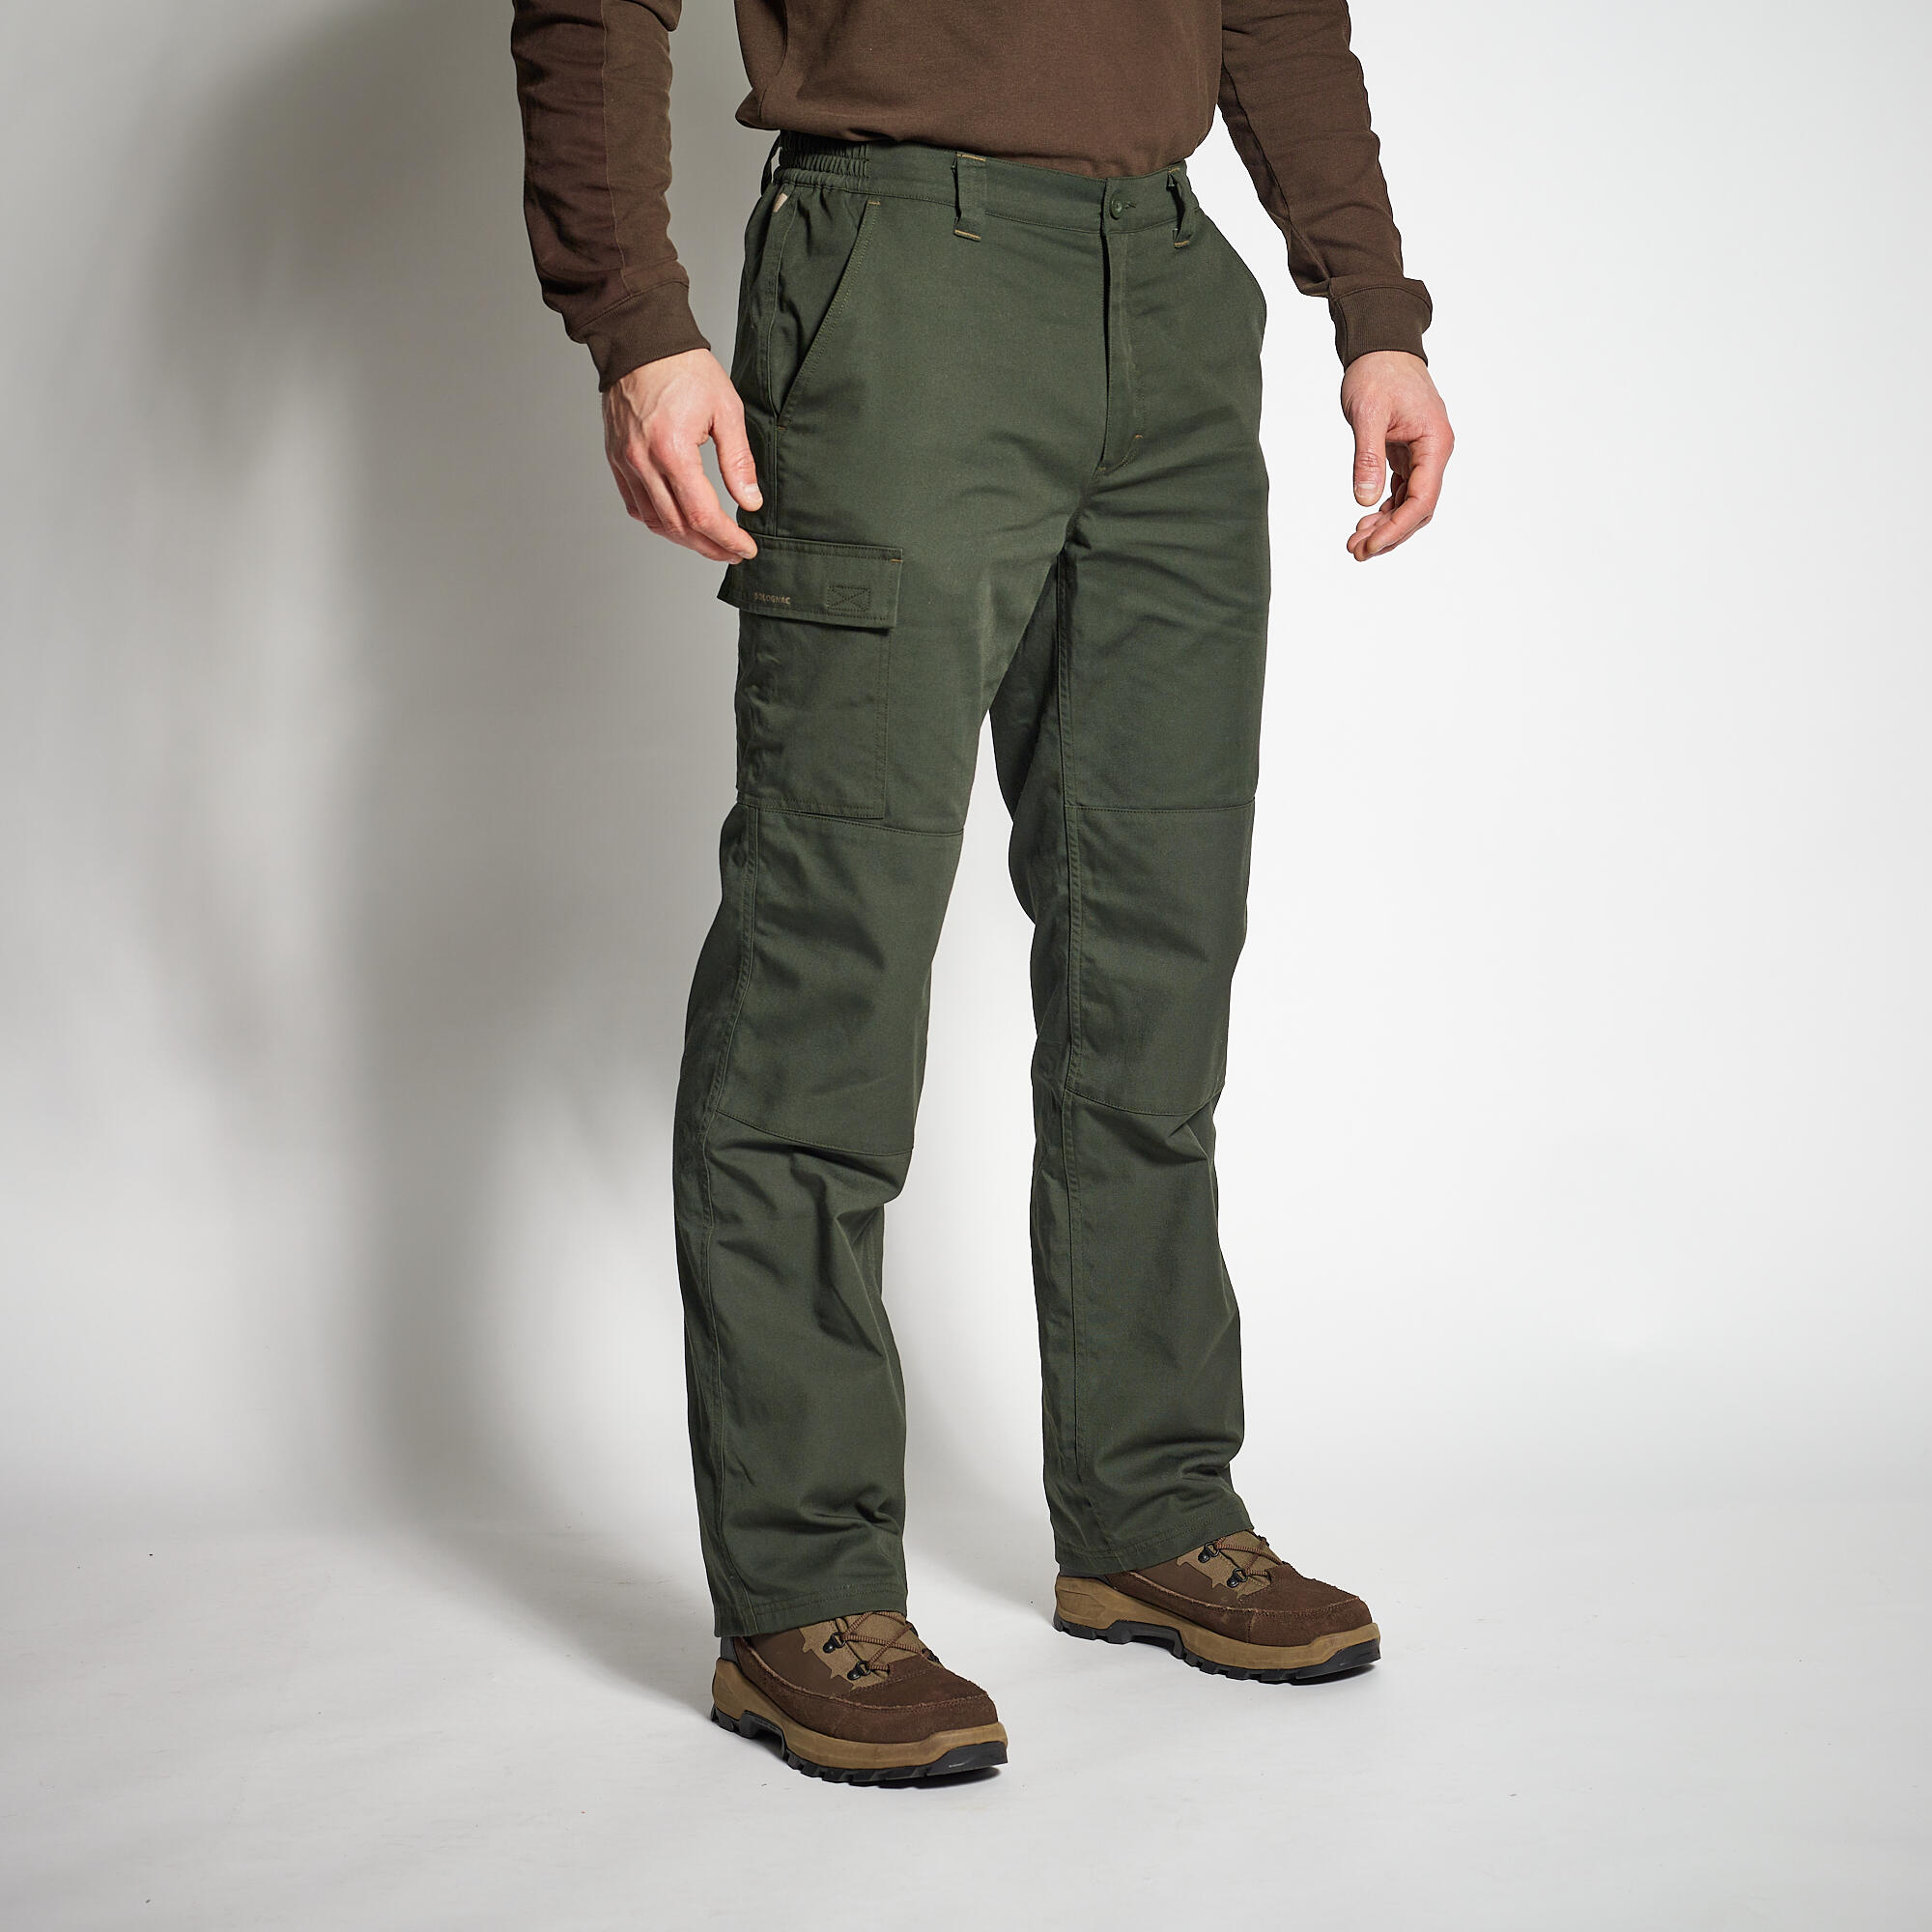 ROBUST WARM TROUSERS 500 BROWN SOLOGNAC | Decathlon